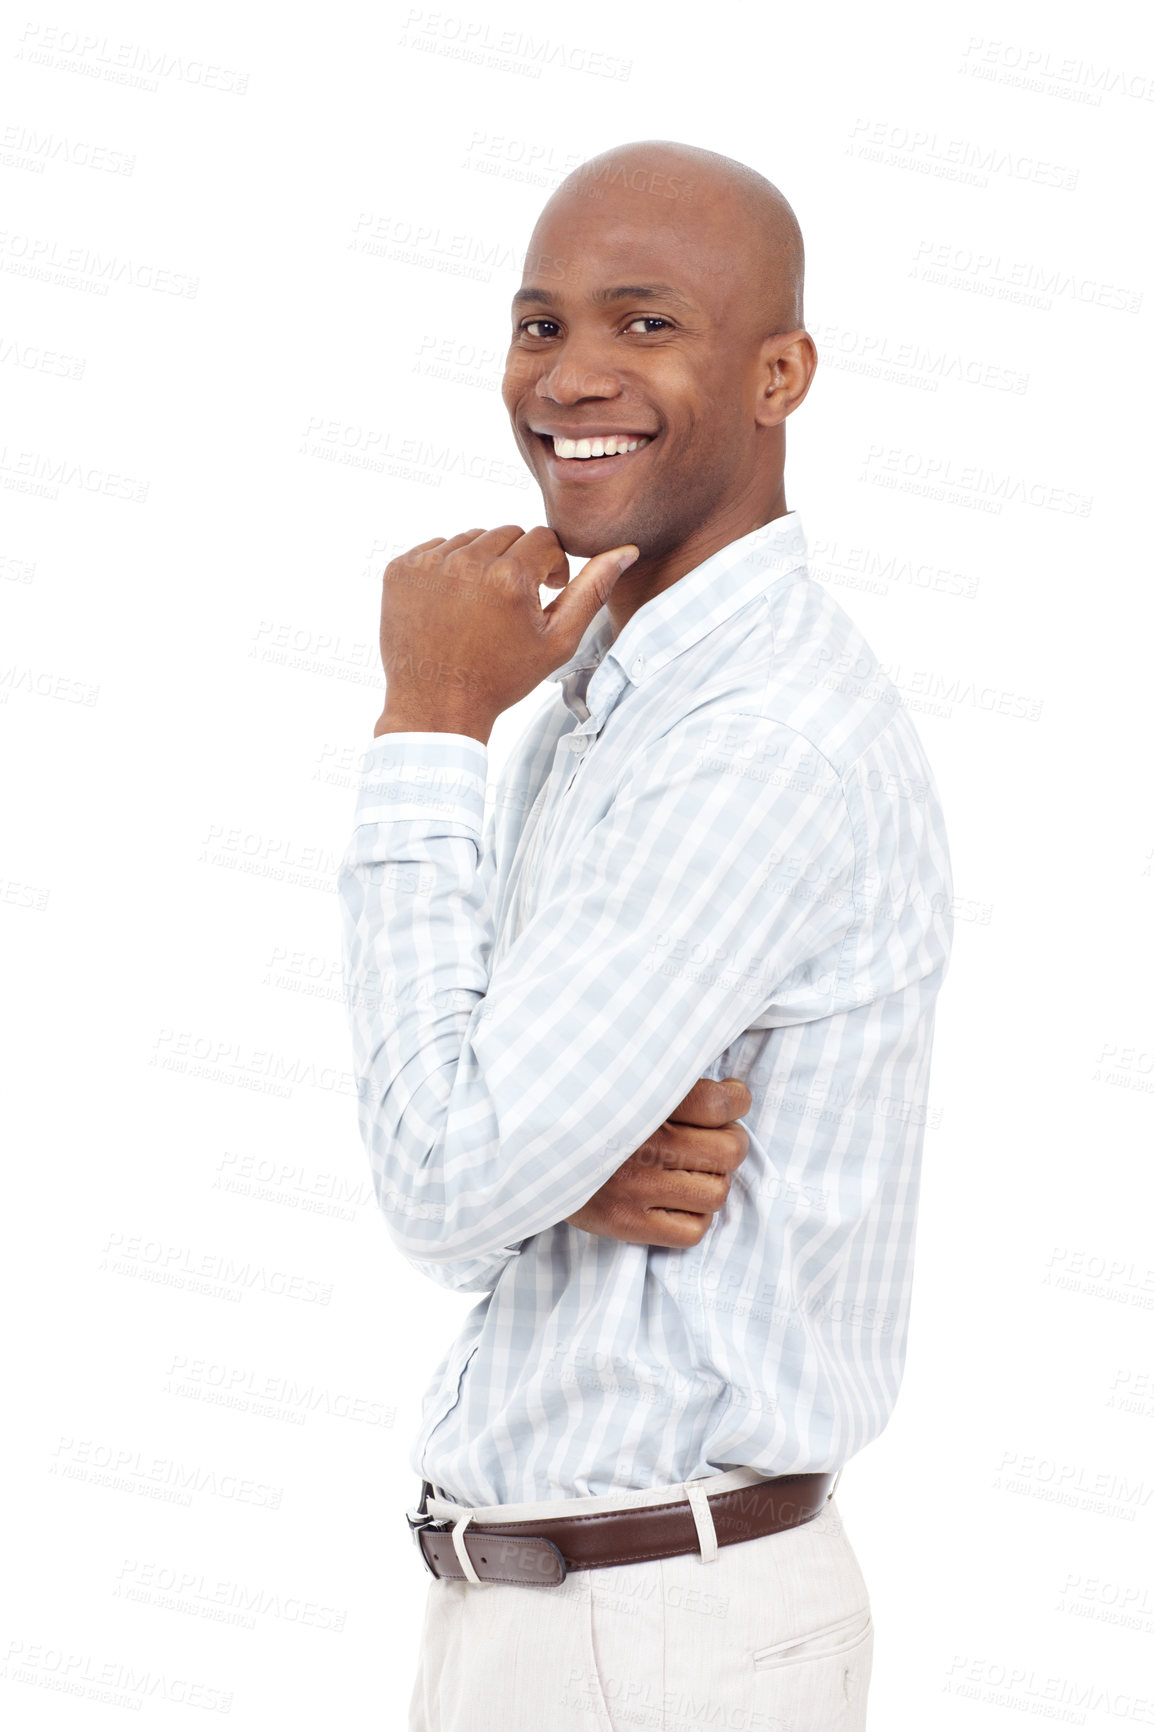 Buy stock photo Sideways portrait of an smiling african american man with his hand on his chin